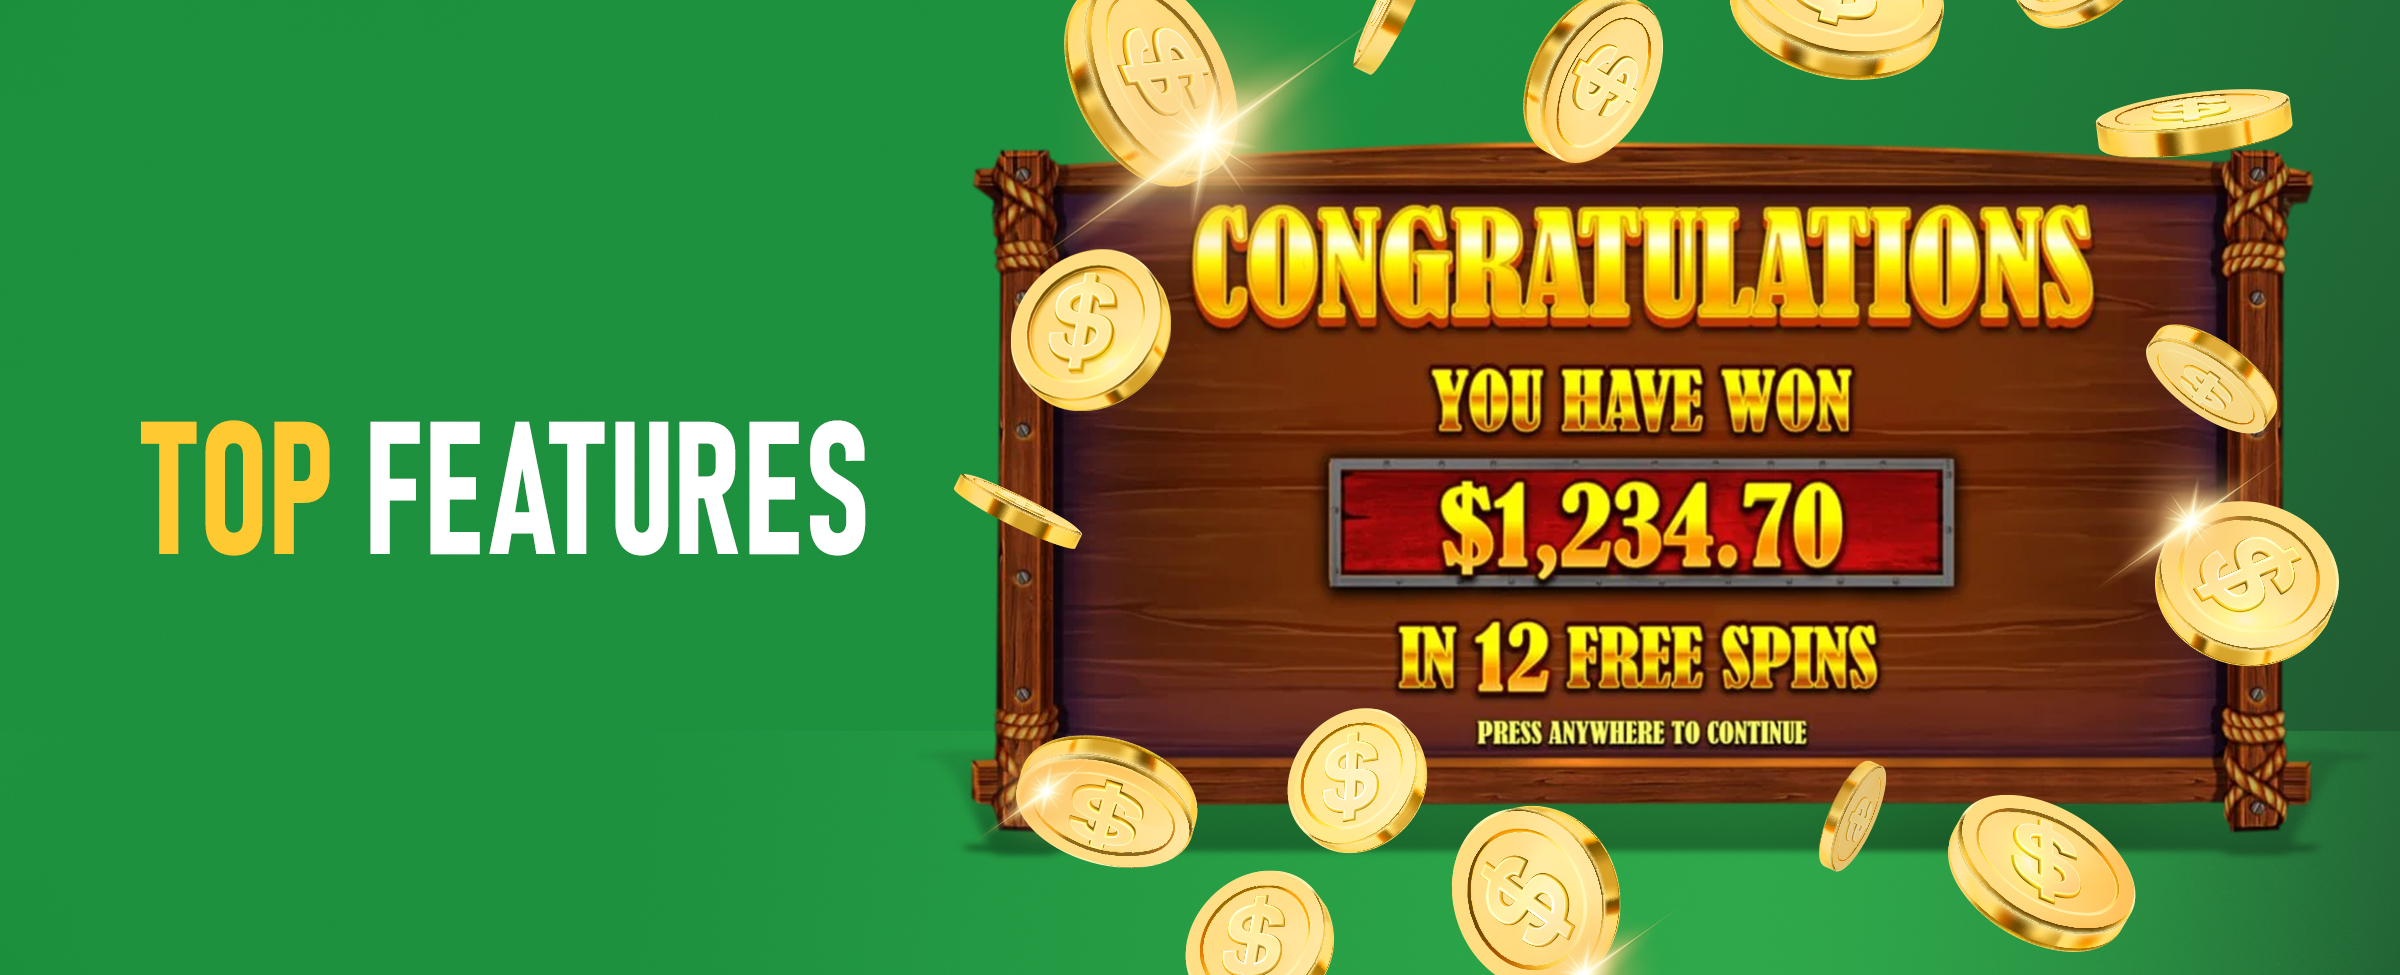 A screenshot from the Buffalo King Megaways slot shows a win amount from the free spins feature alongside the wording ‘Top Features’. On a green background.